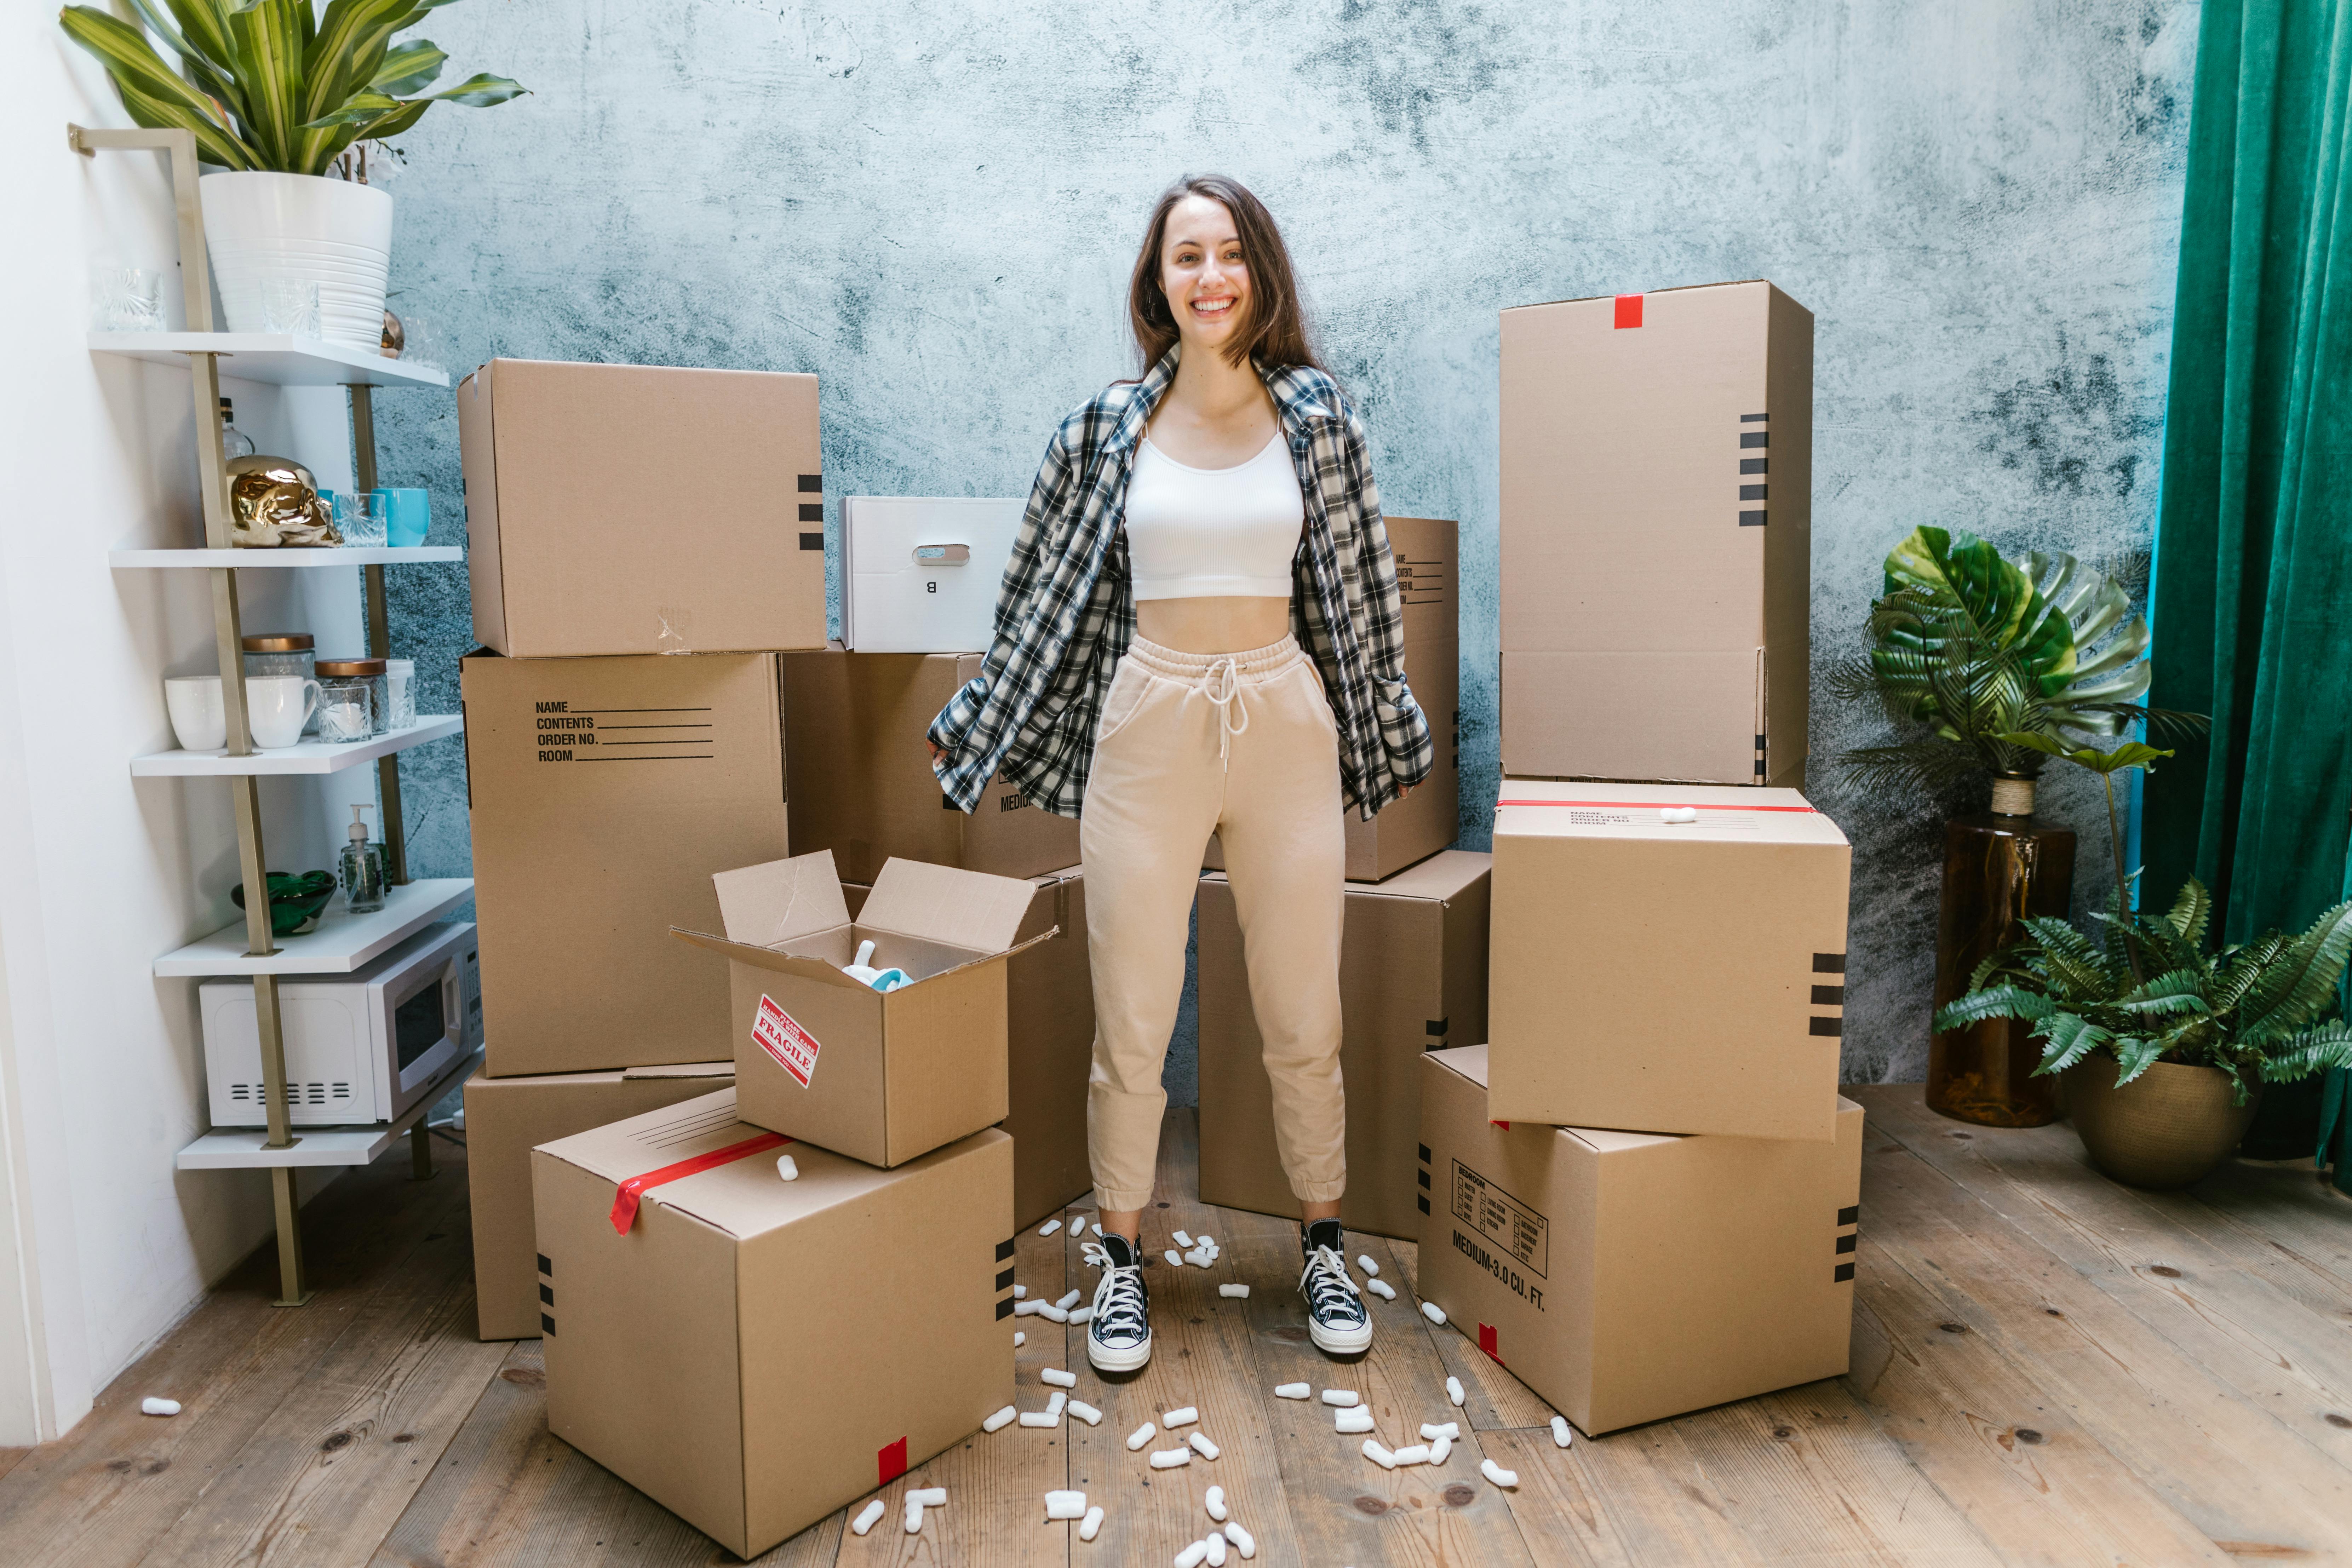 A woman smiling while surrounded by boxes | Source: Pexels